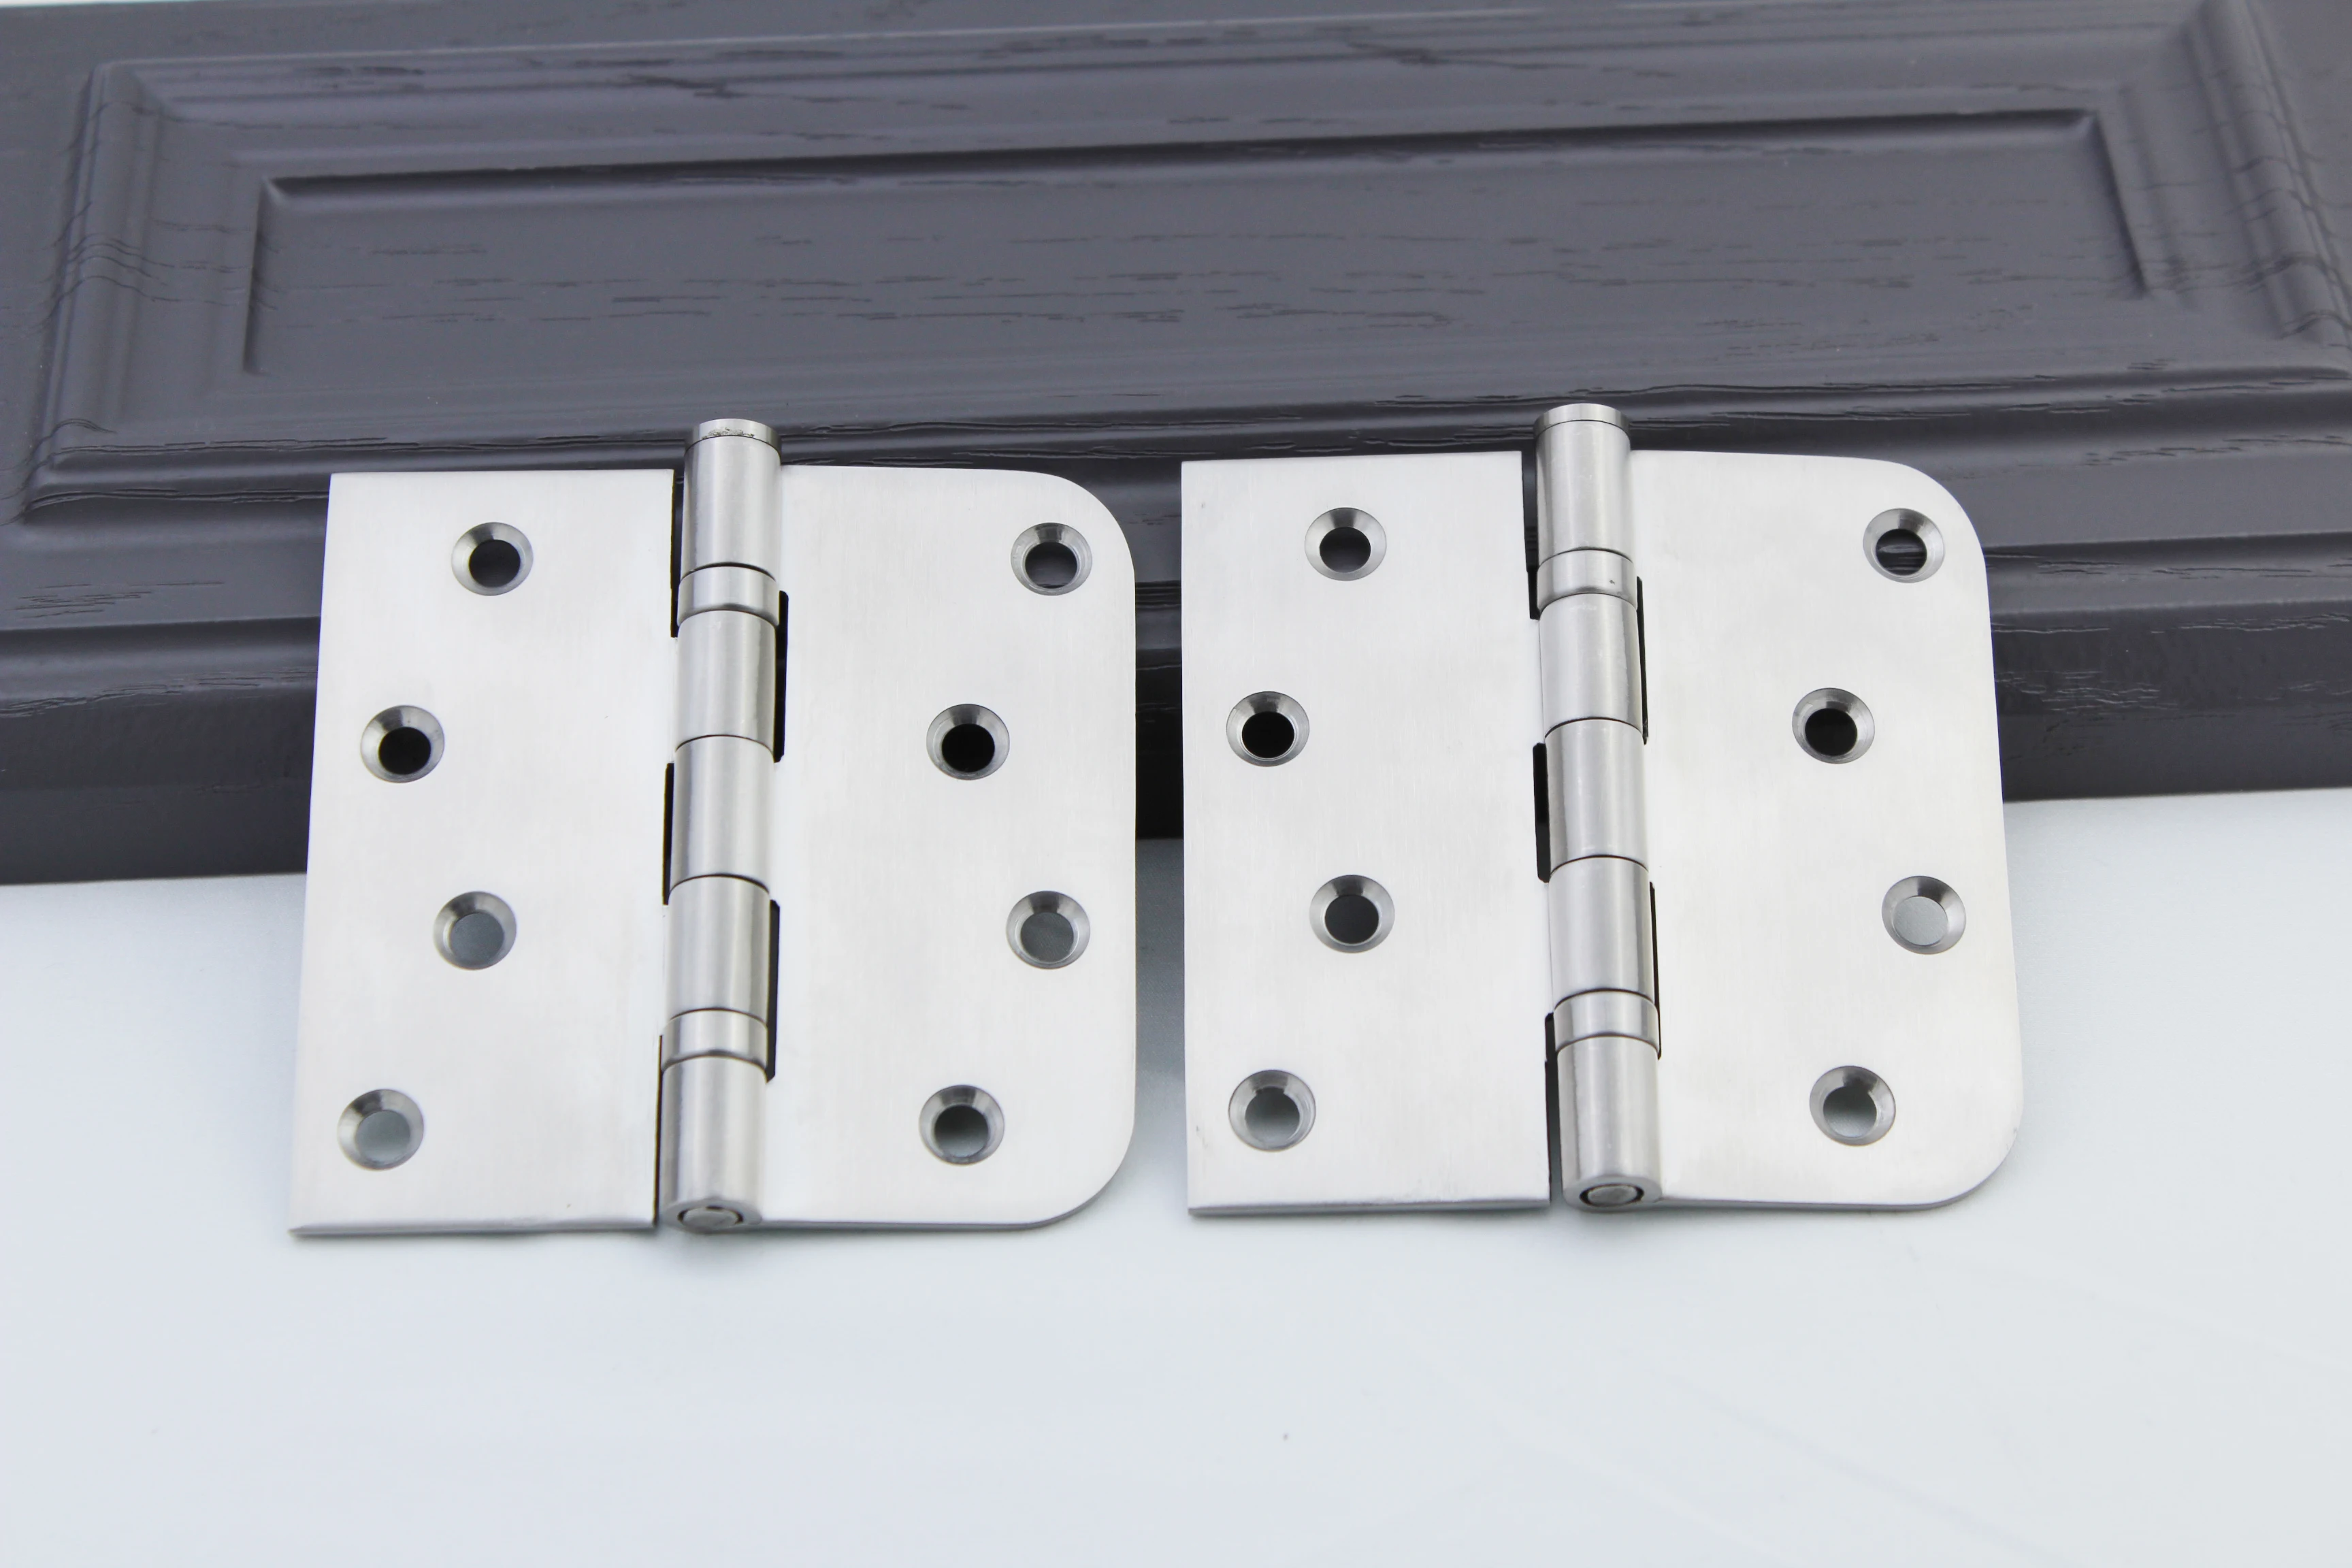 Manufacture high quality 270 degree hinge for cabinets